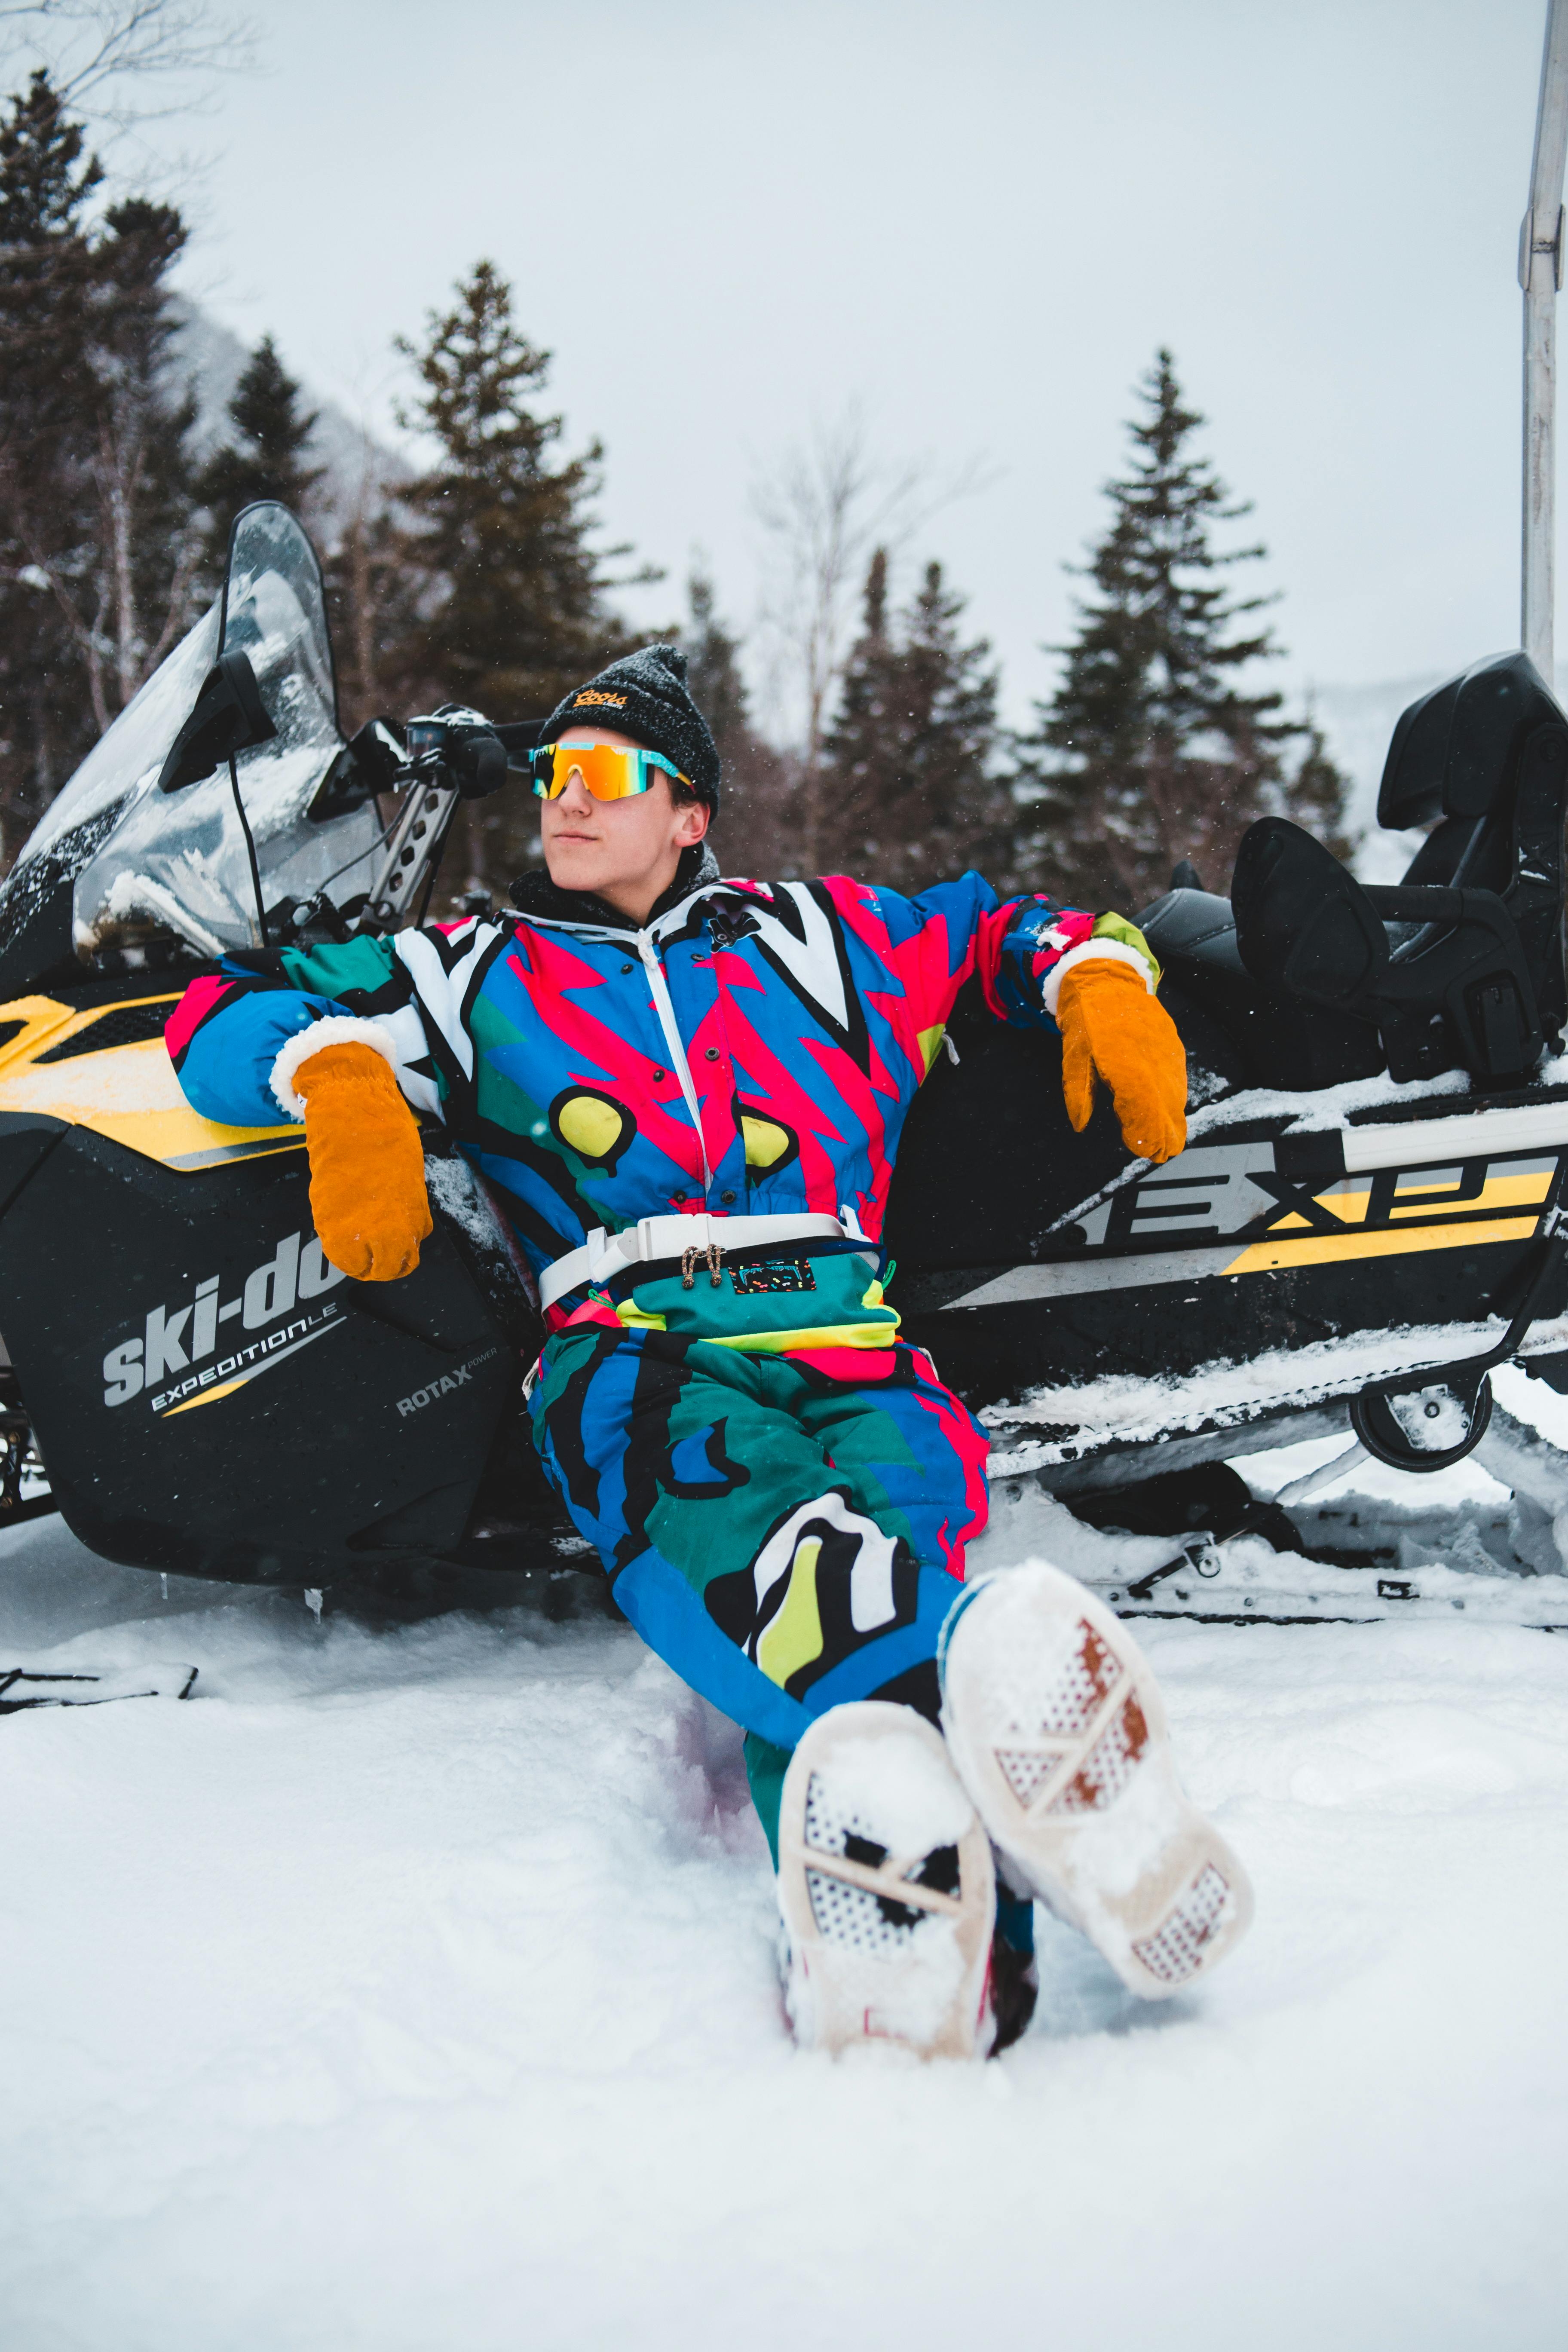 Travel by Snowmobile in Winter Destinations: Tips for an Exhilarating Ride